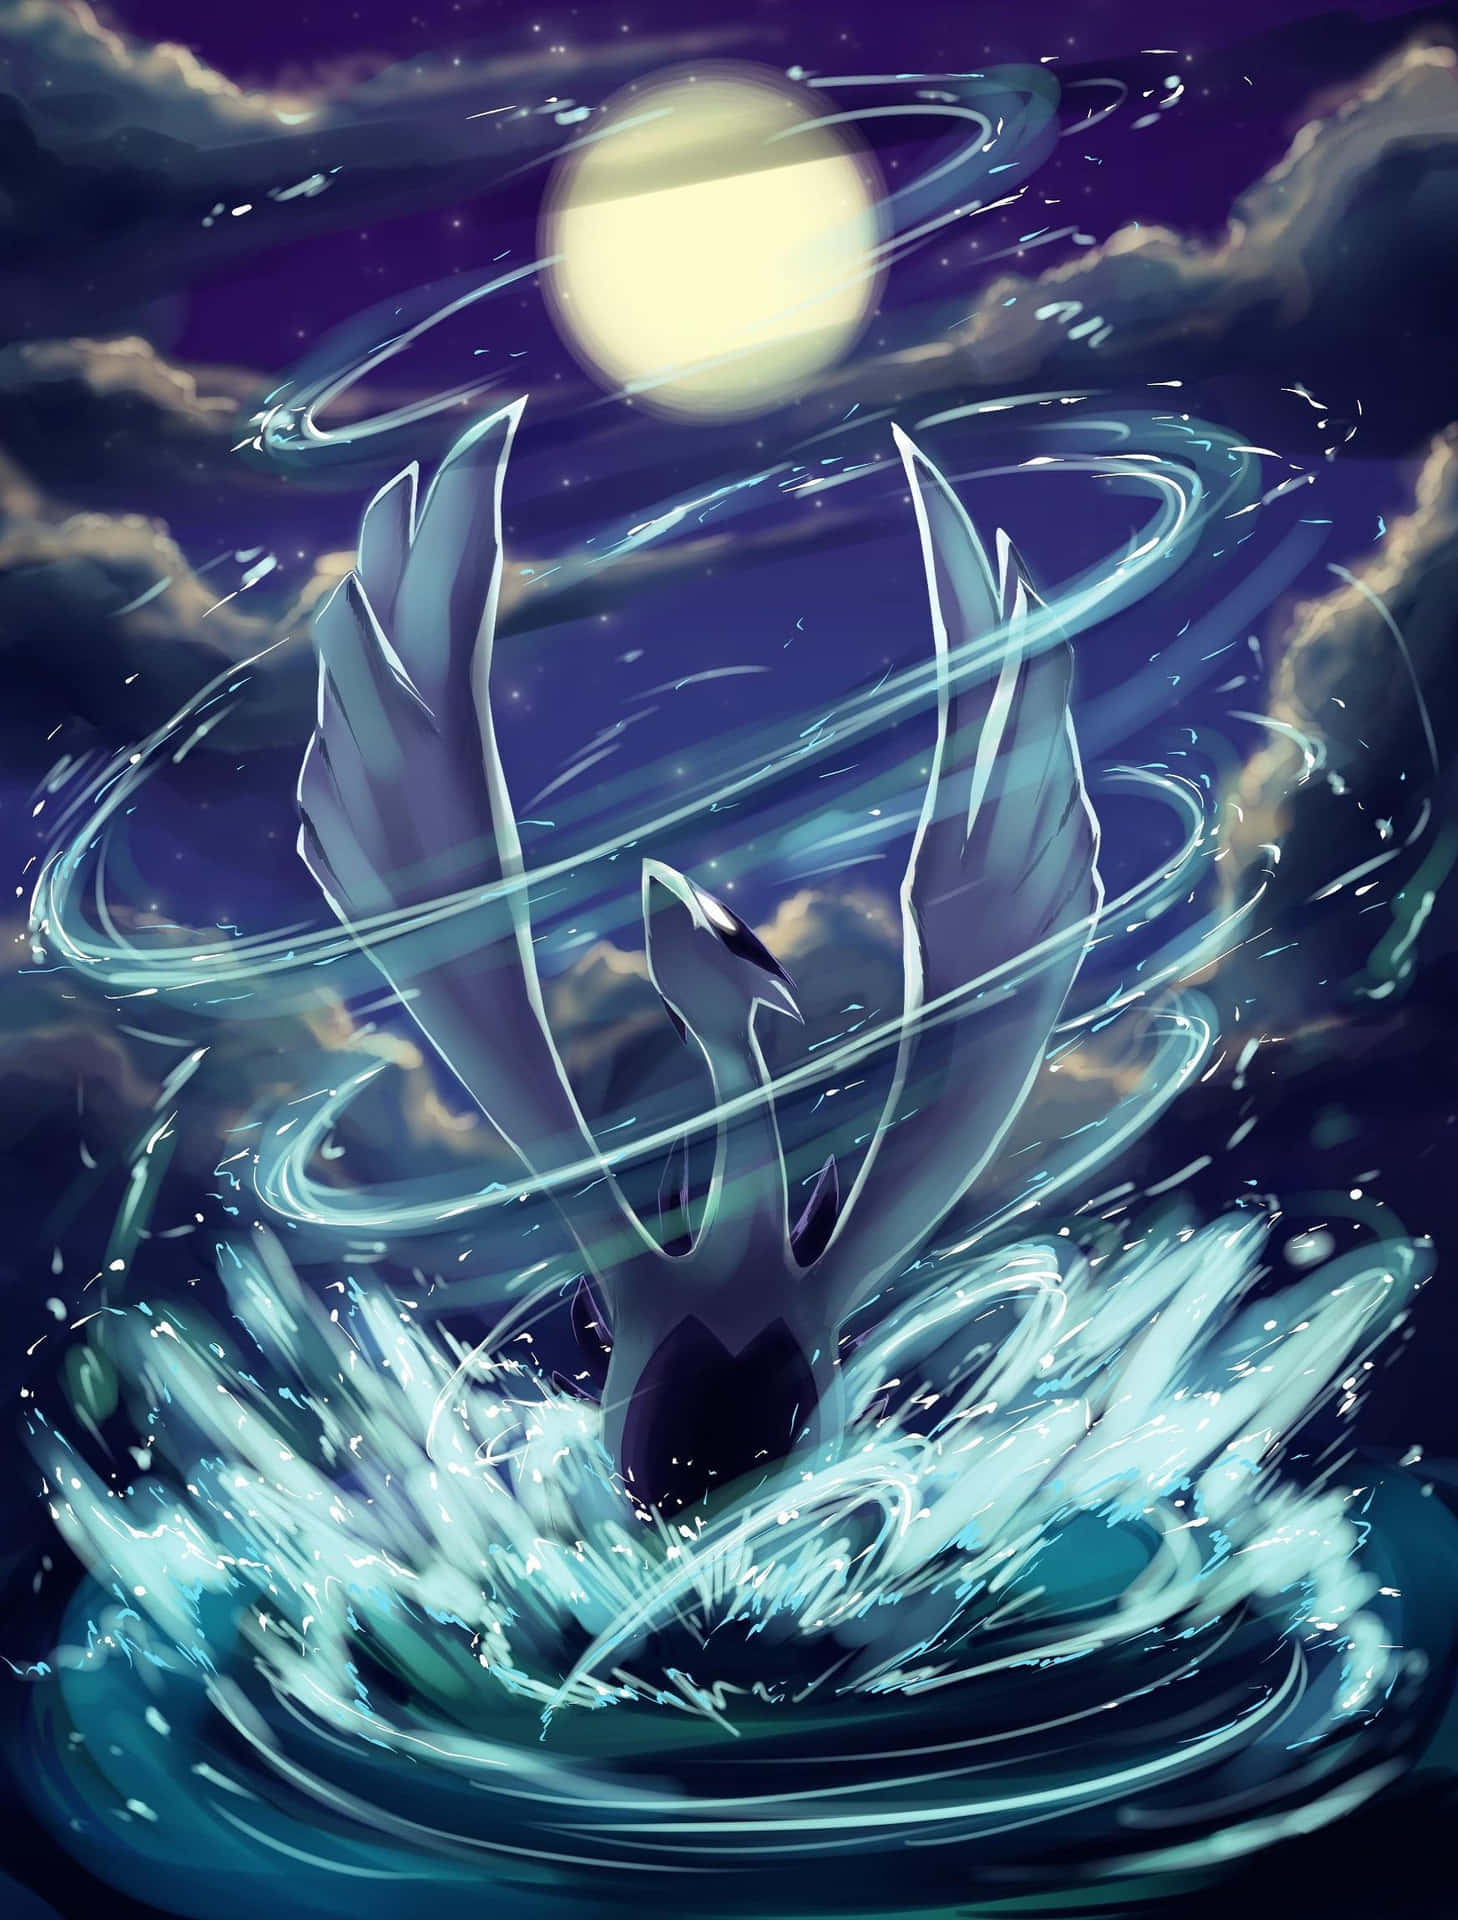 Feel the beauty of the majestic Lugia